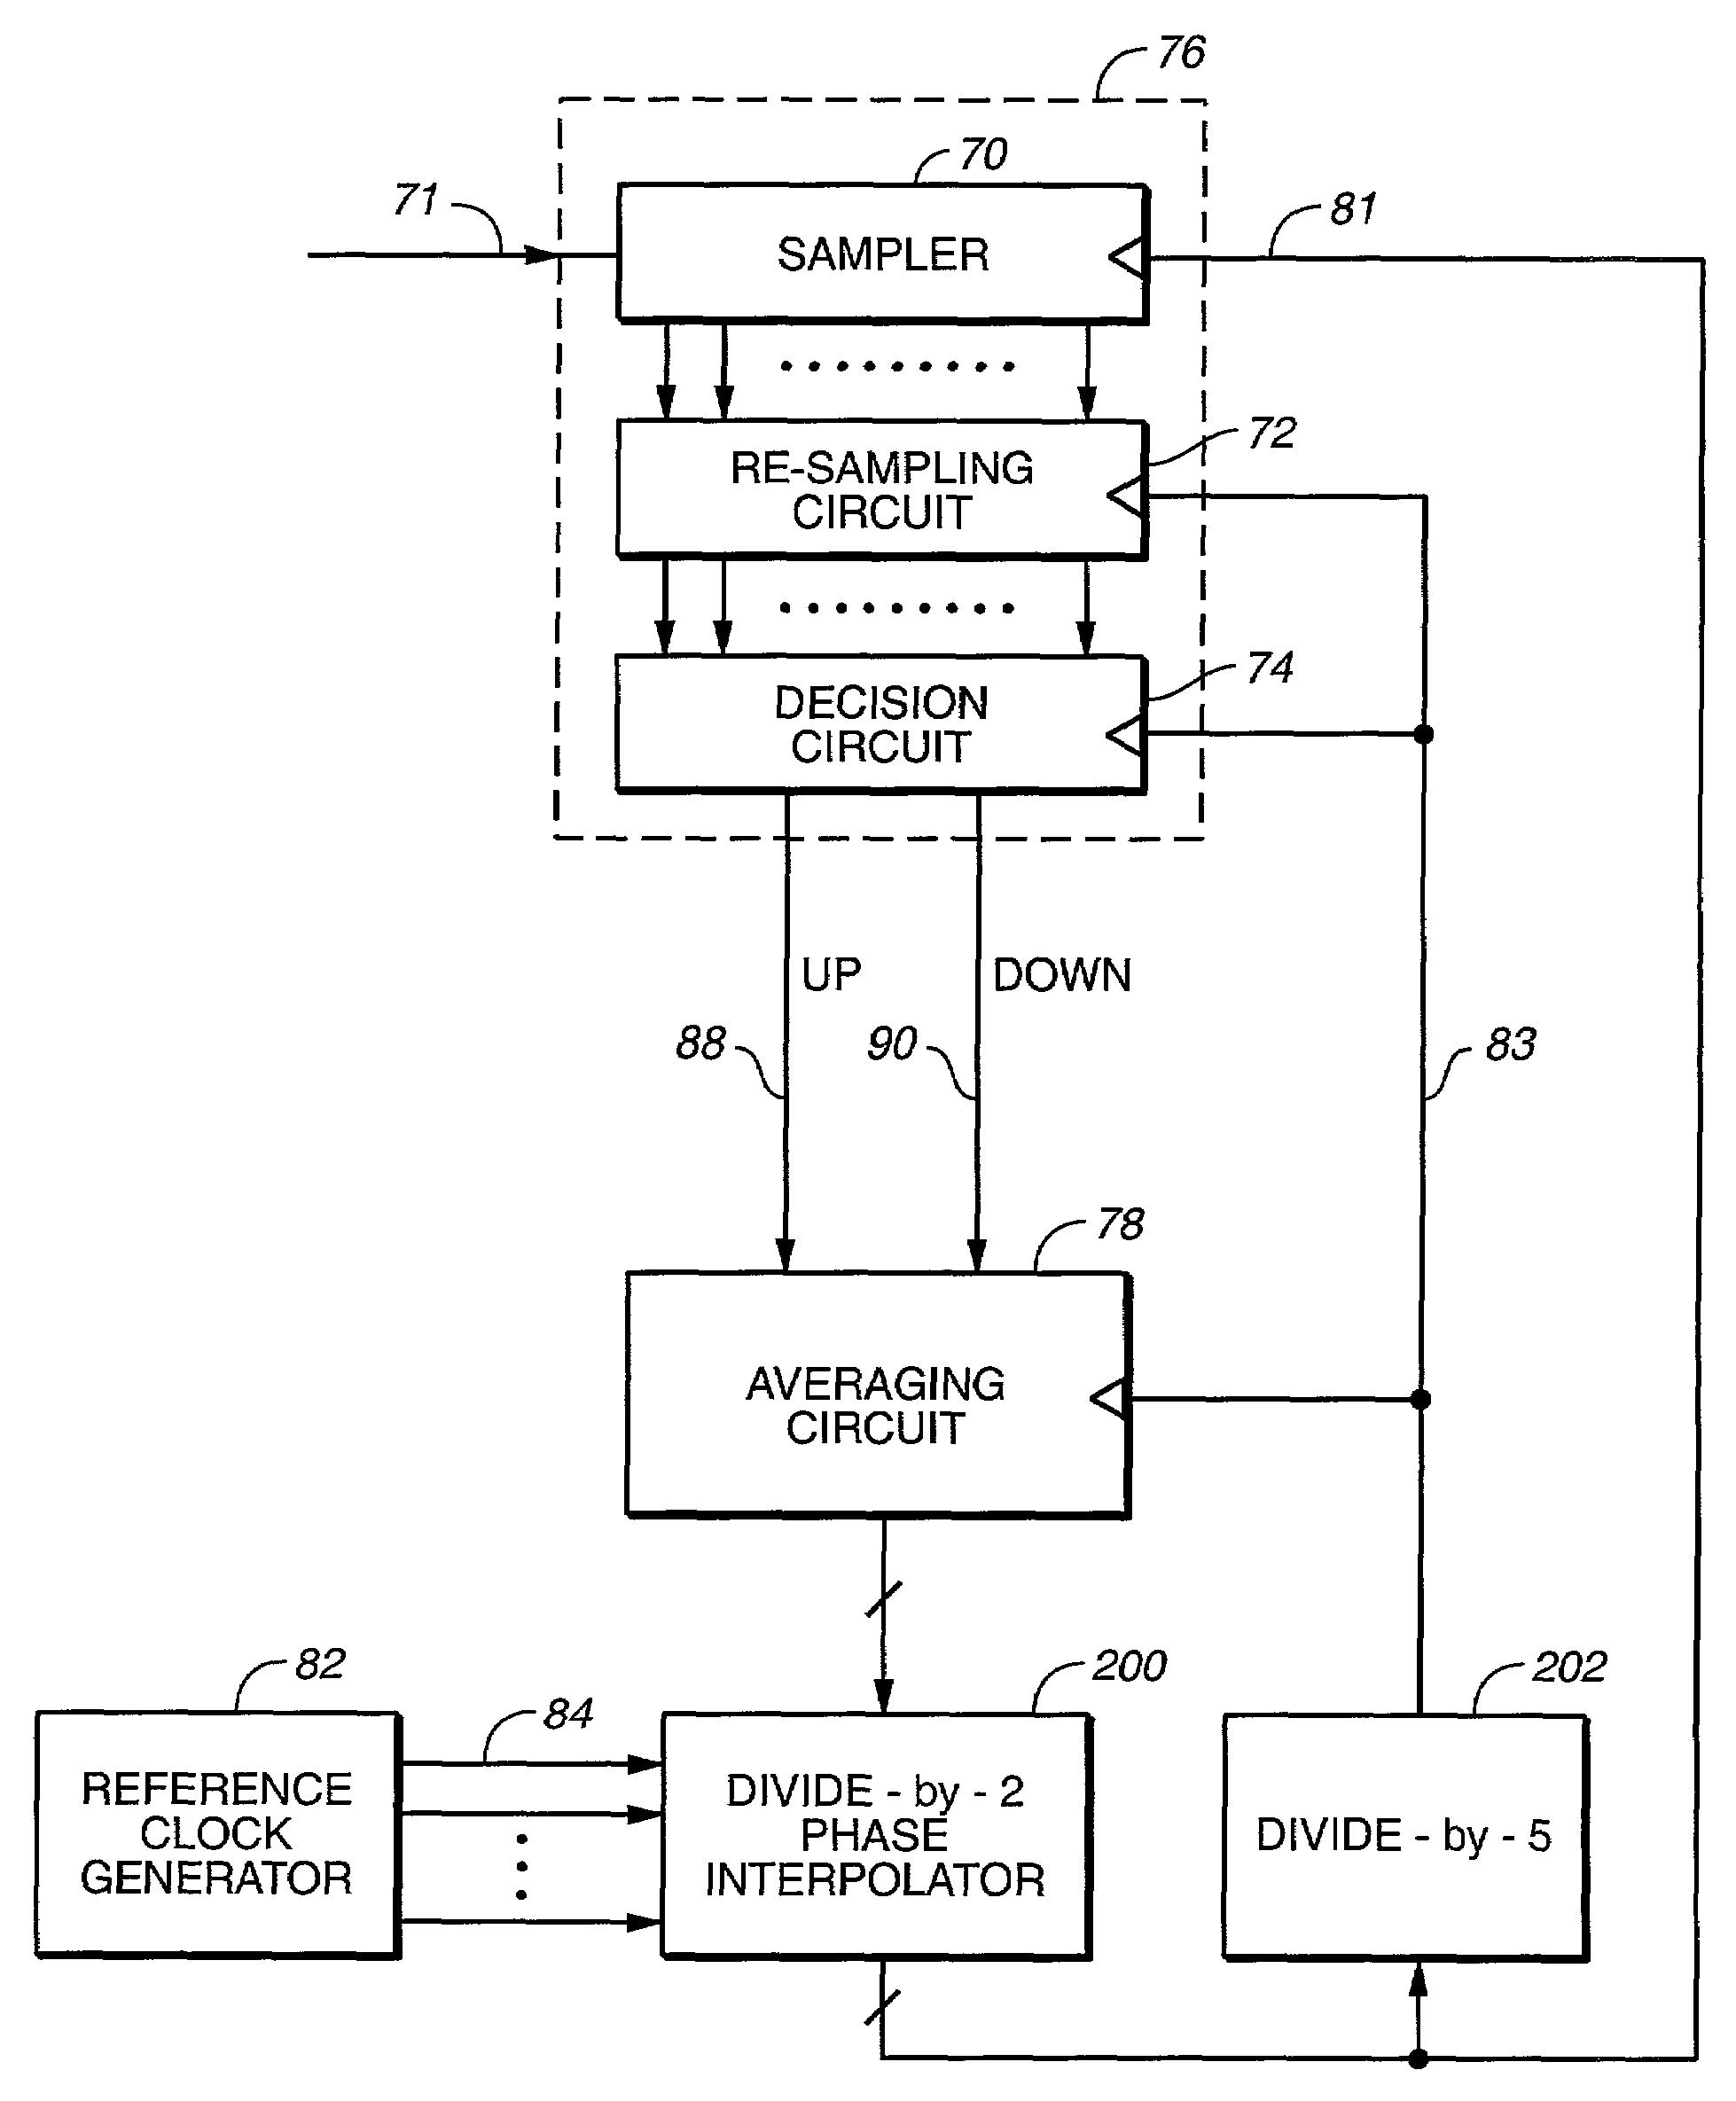 Method and apparatus for high-speed clock data recovery using low-speed circuits